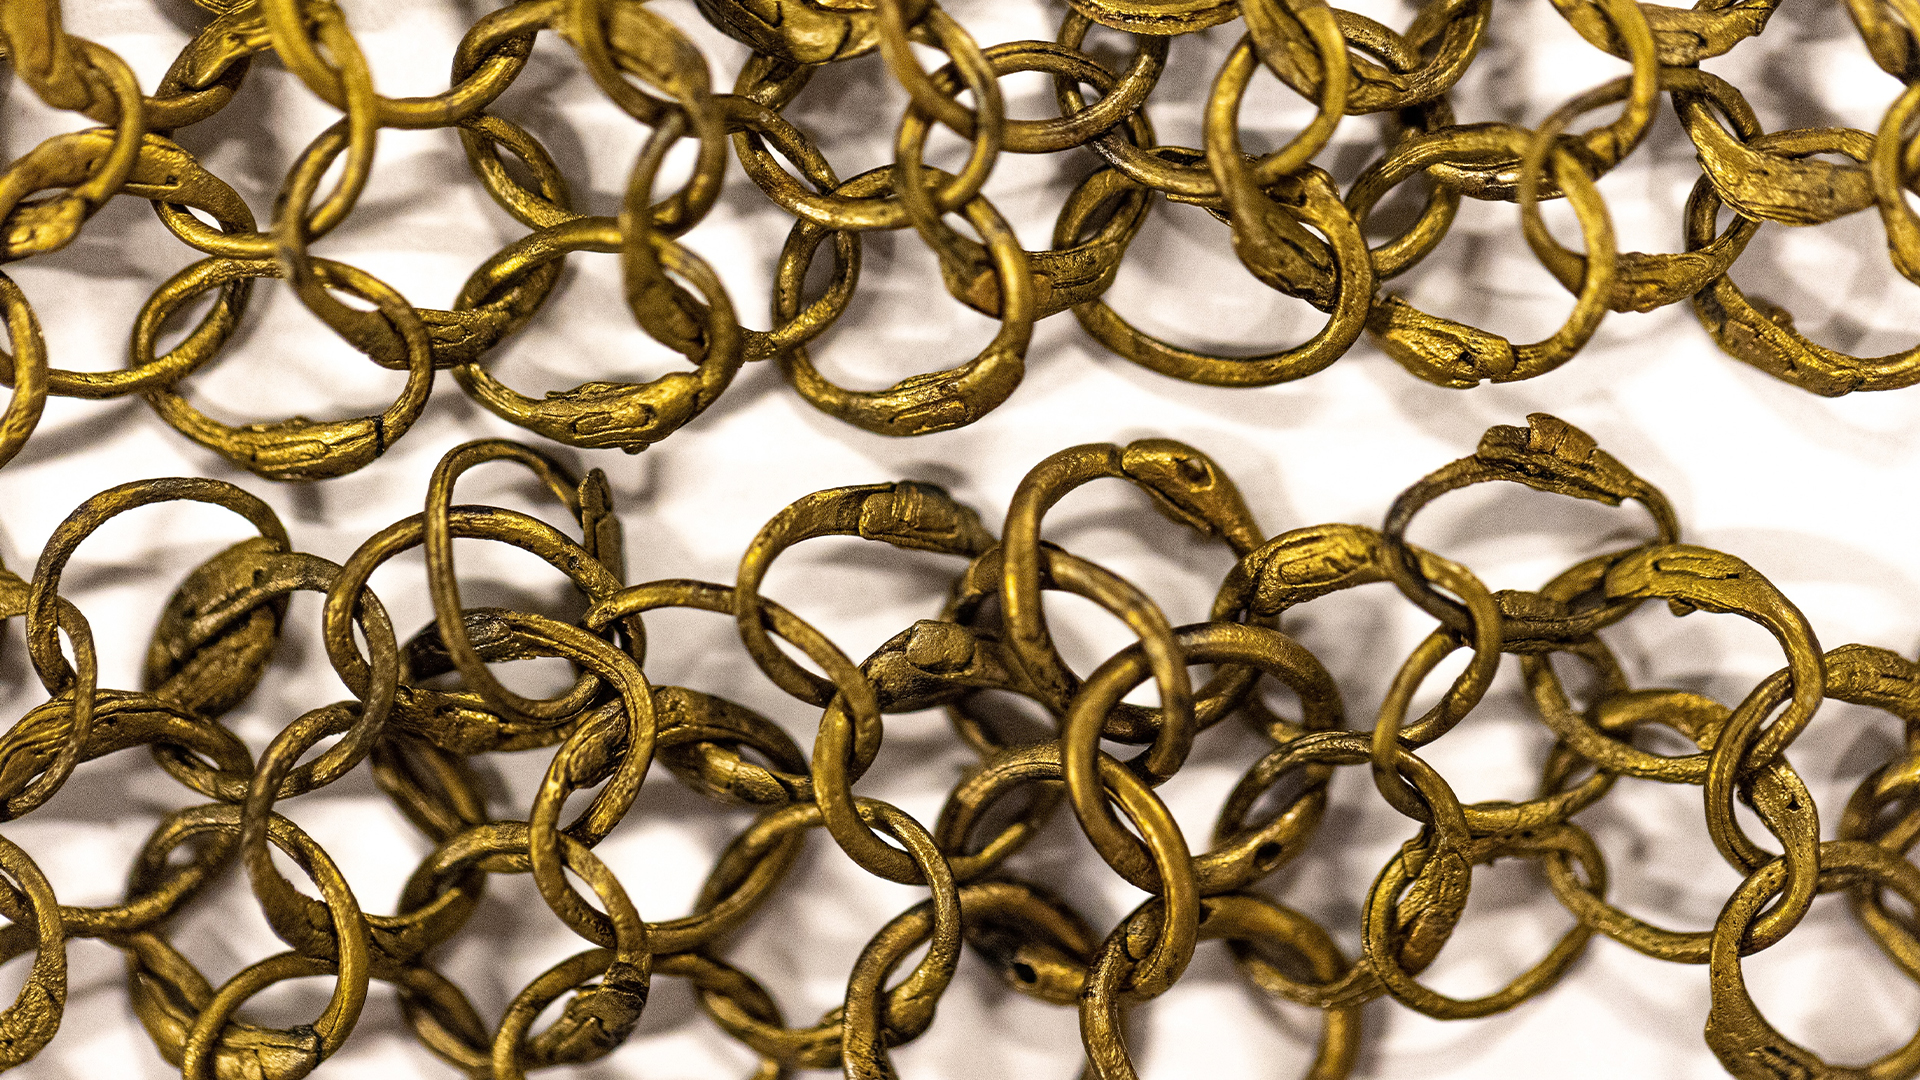 Gold-colored chainmail against a white background.